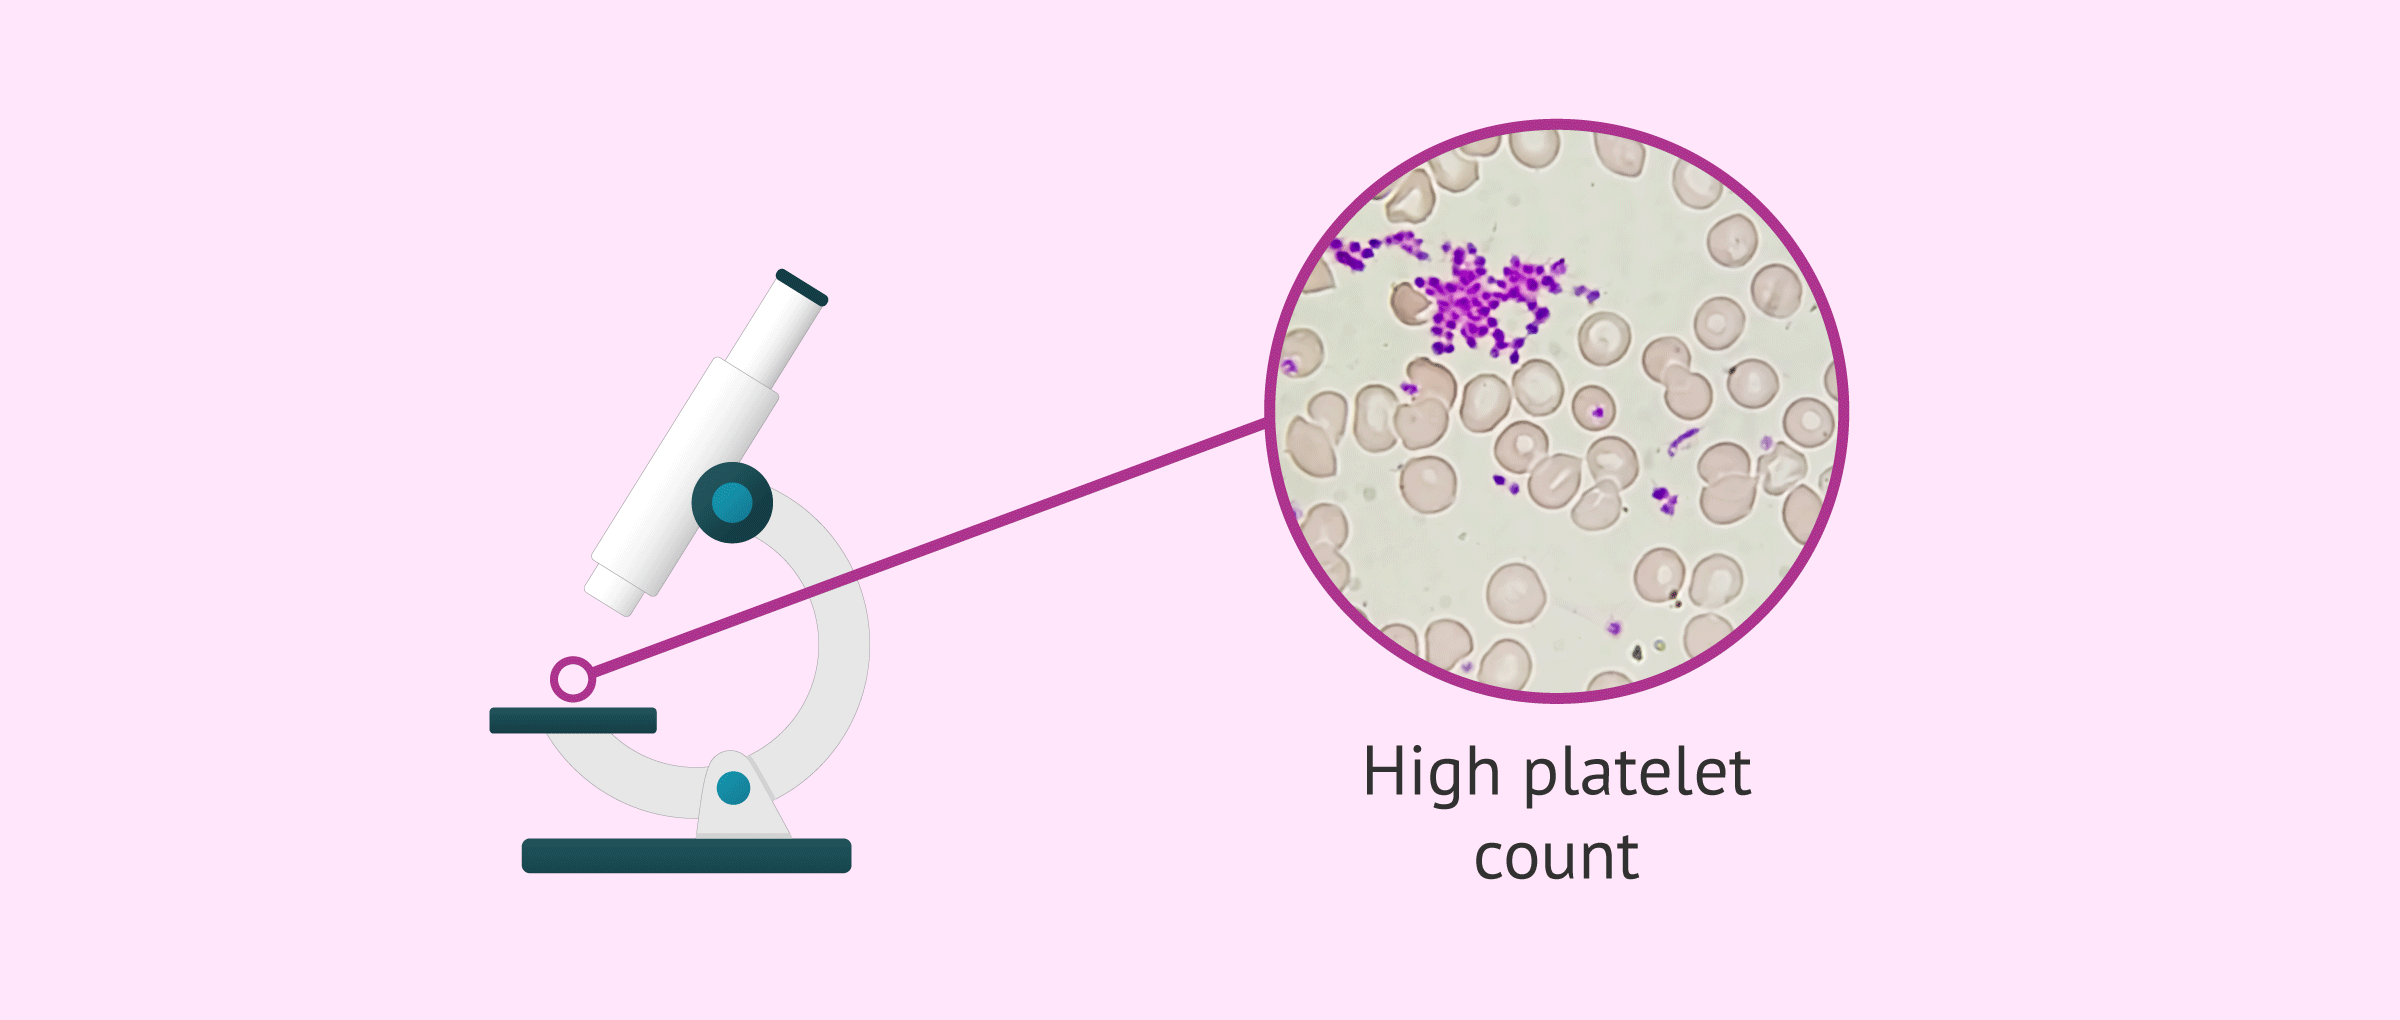 Visualization of platelets under the microscope